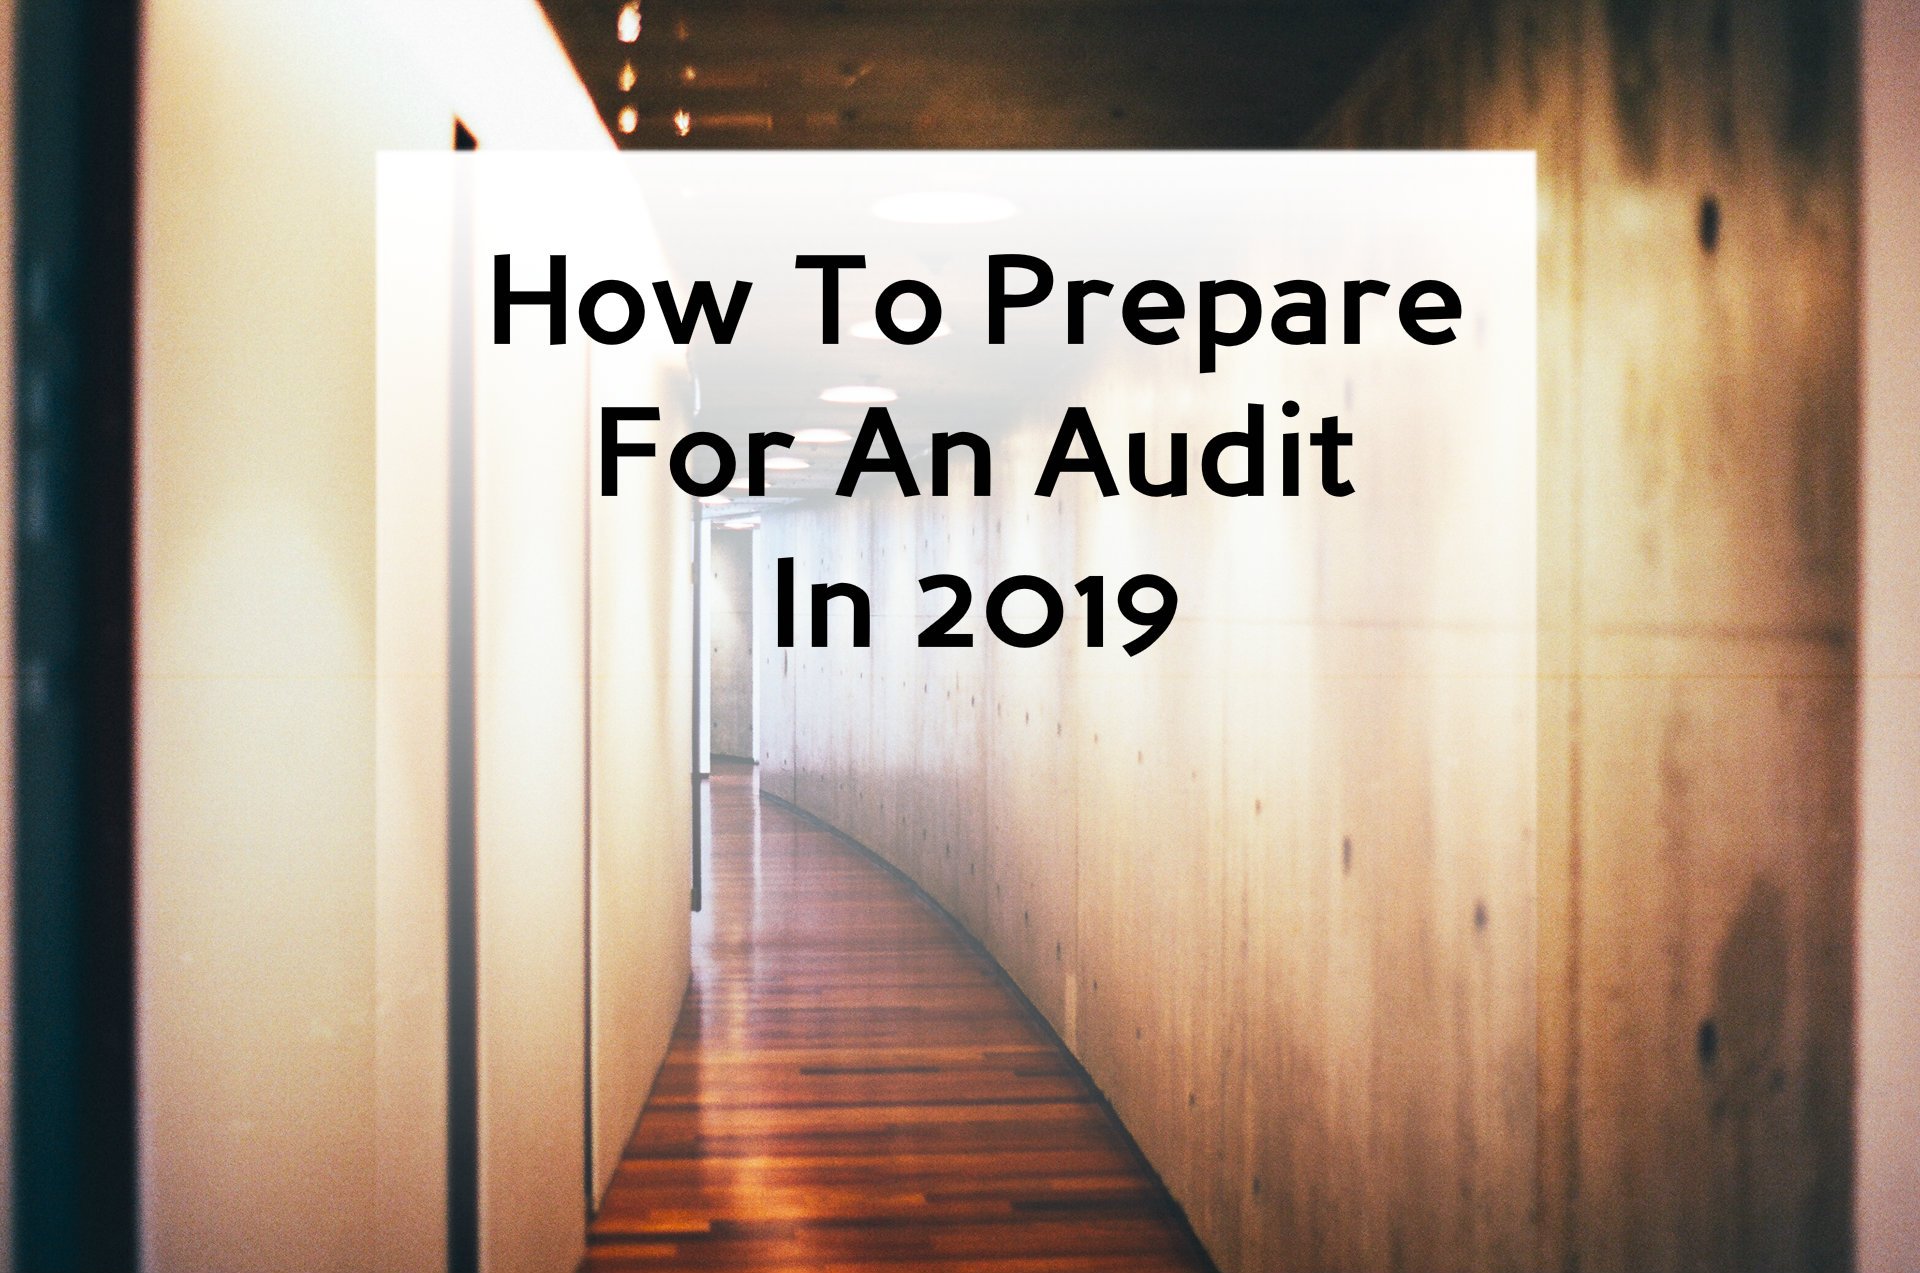 How to Prepare for an Audit in 2019